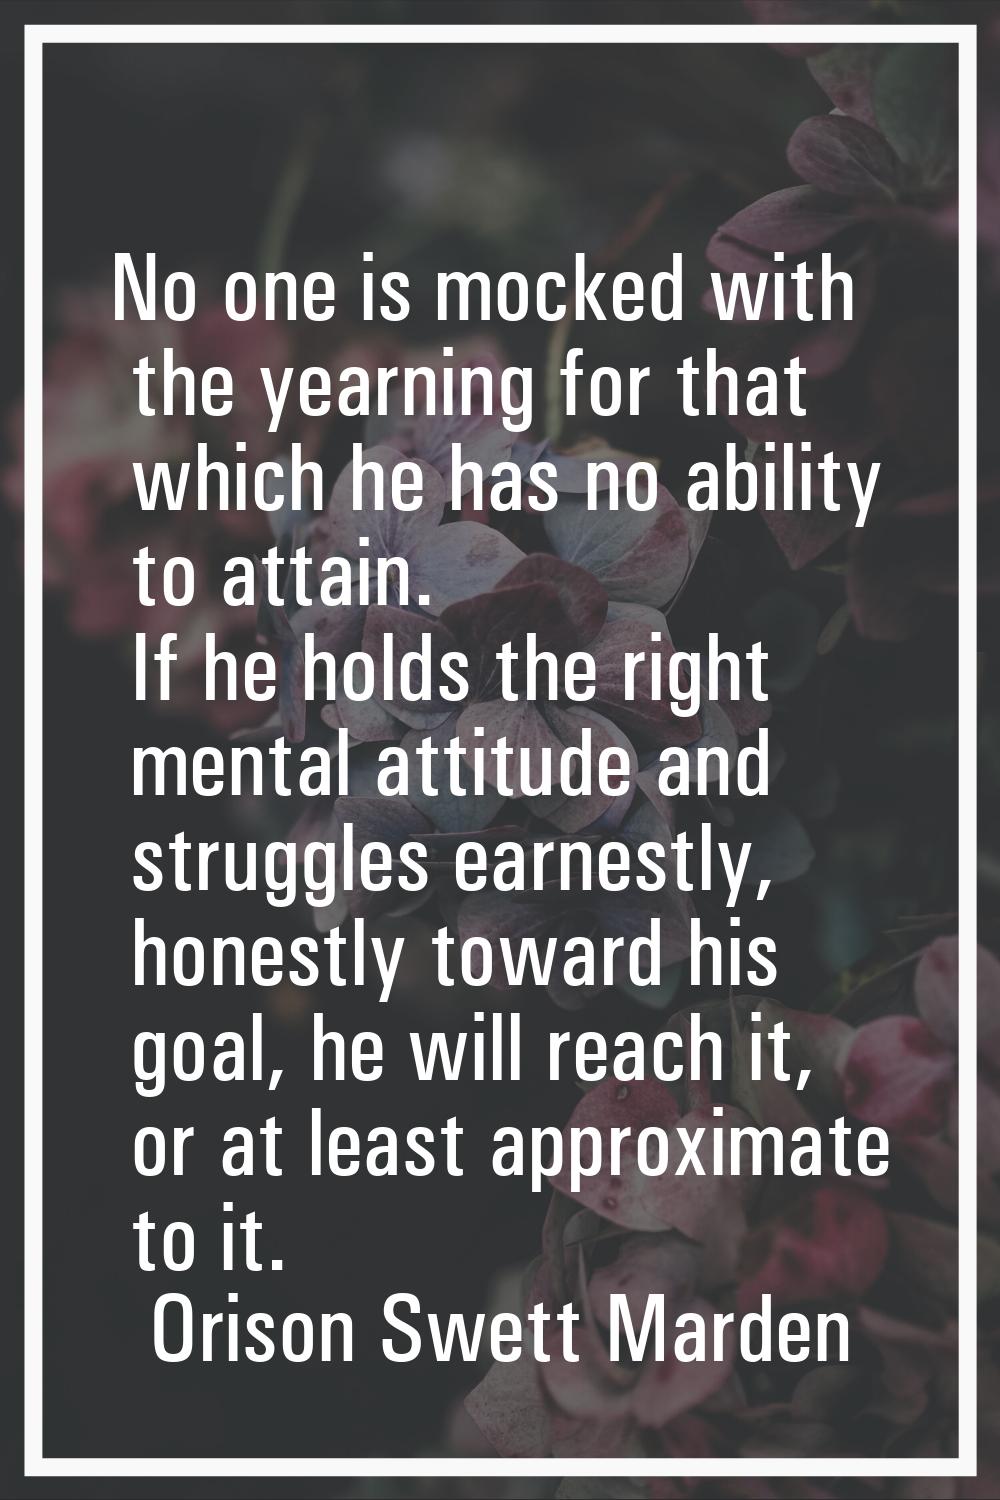 No one is mocked with the yearning for that which he has no ability to attain. If he holds the righ